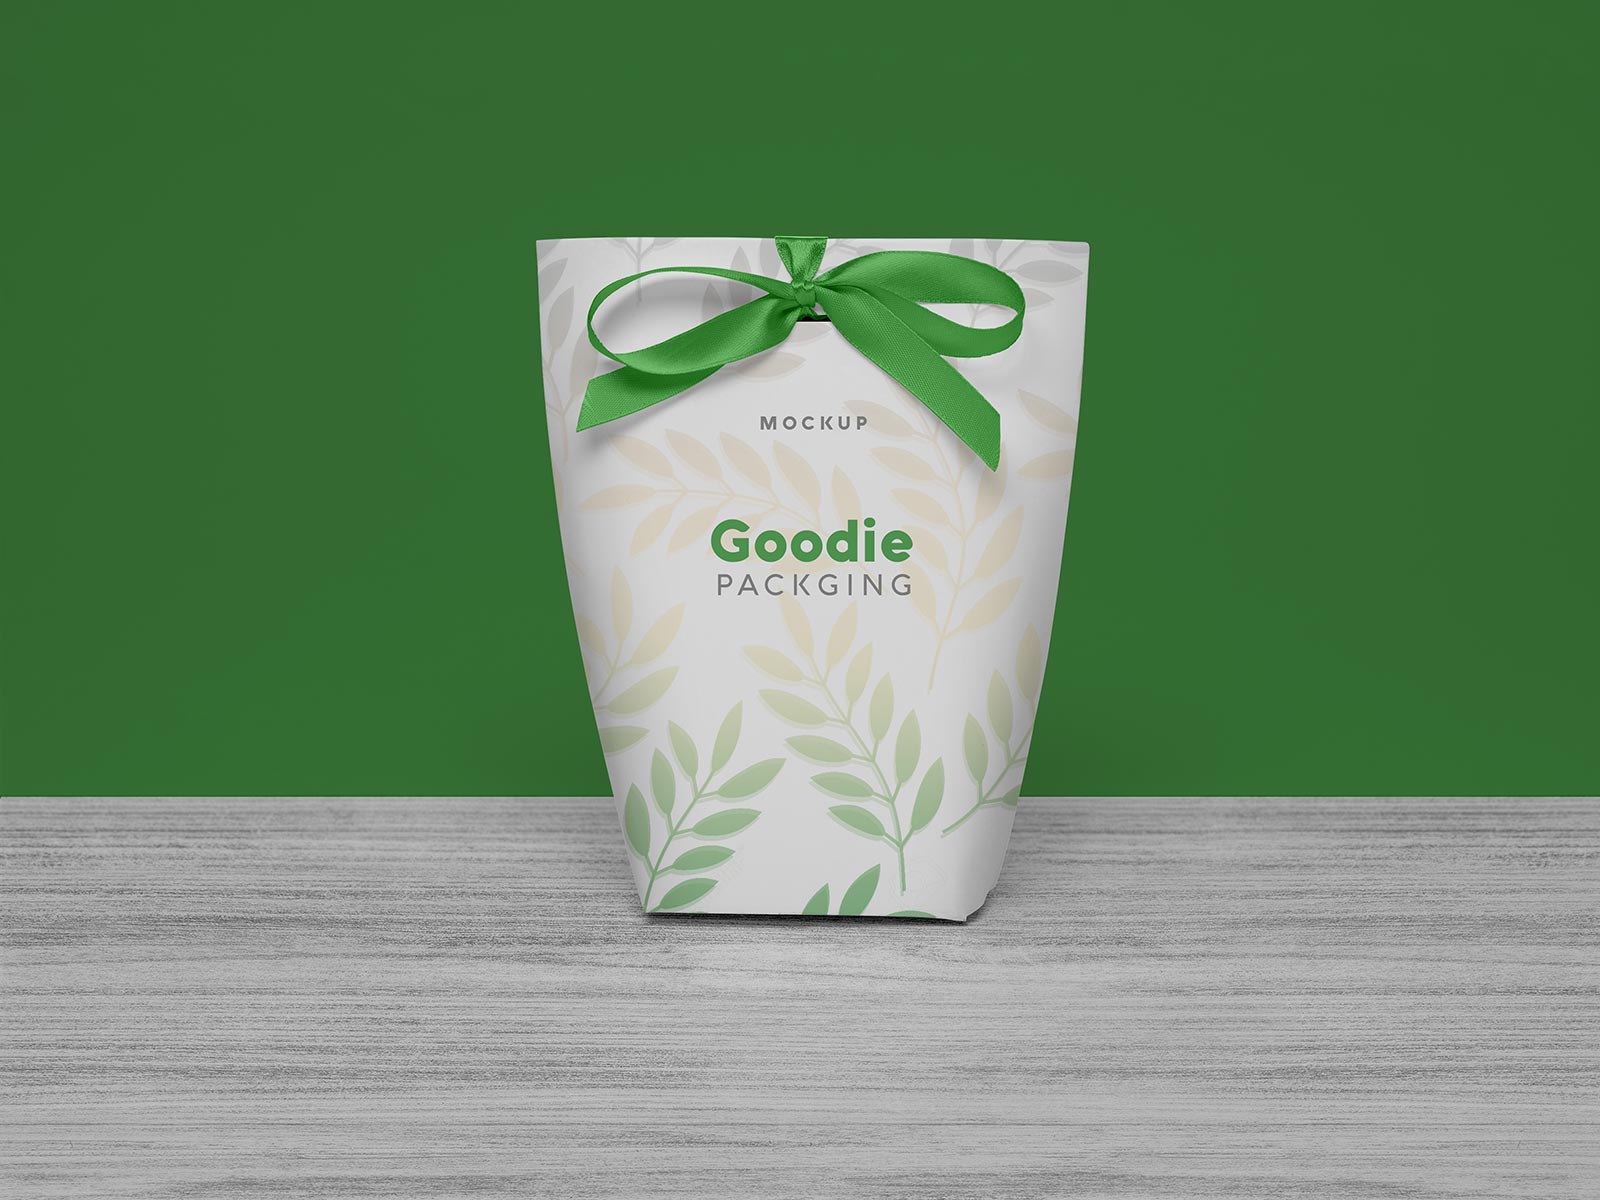 Free-Candy-Goodie-Bag-Packaging-Mockup-PSD